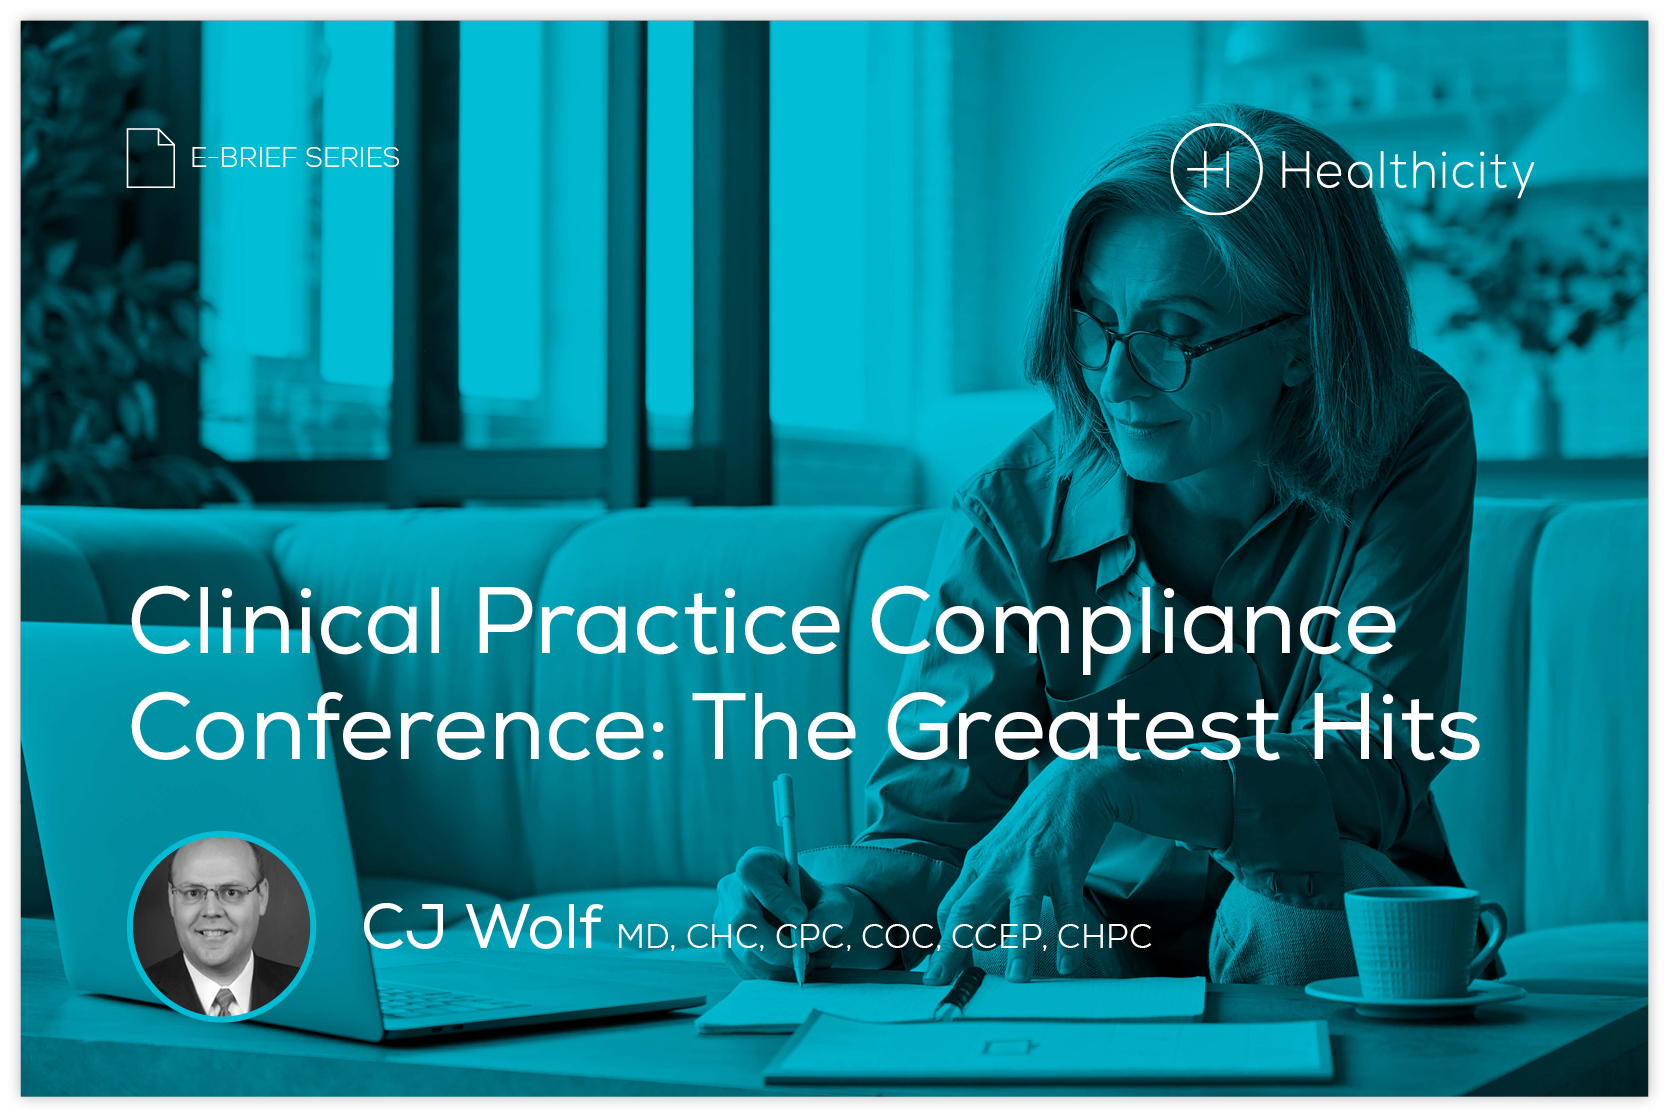 Download the eBrief - Clinical Practice Compliance Conference: The Greatest Hits